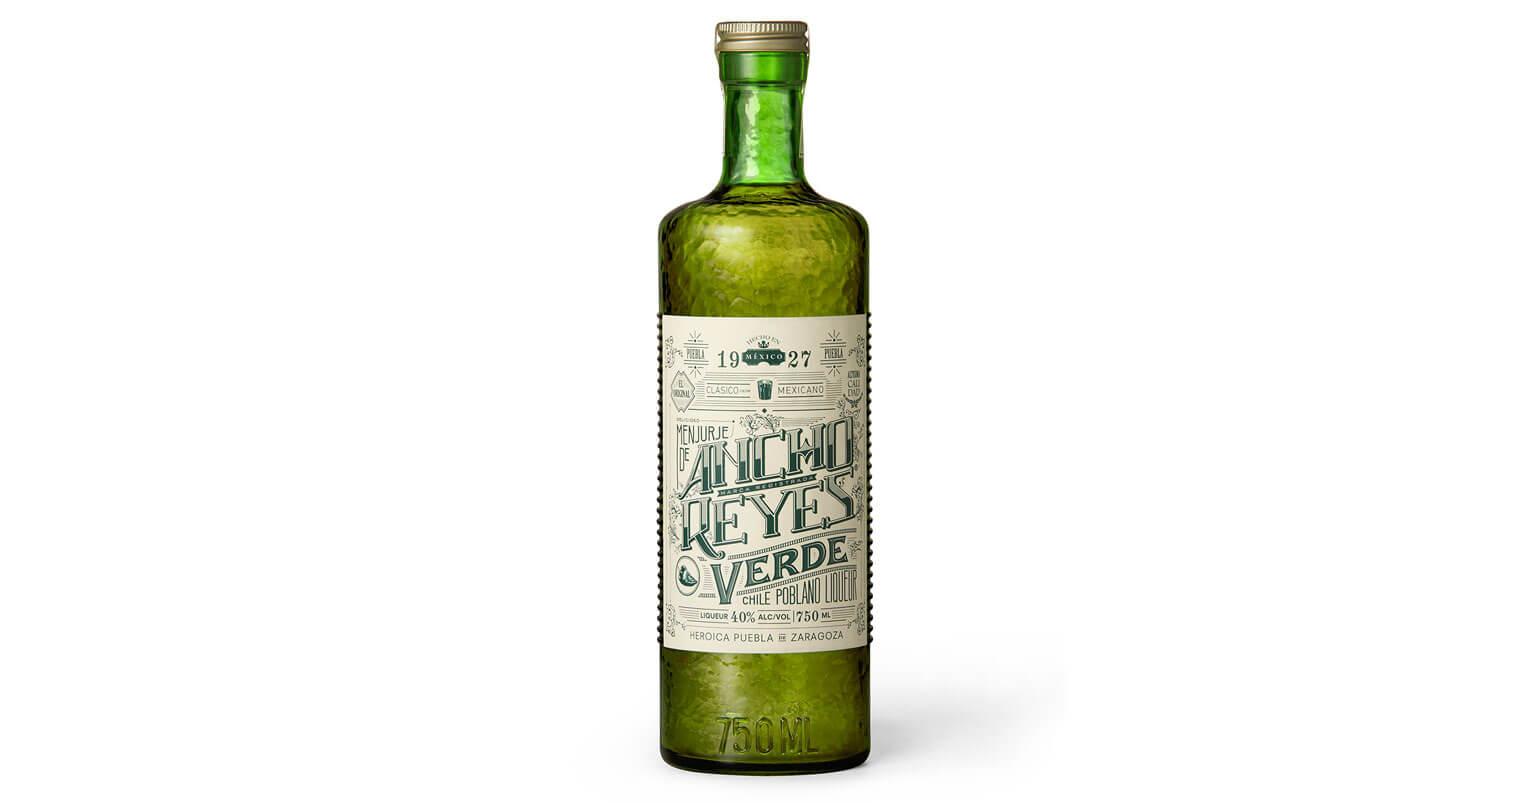 ancho-verde-bottle-featured image